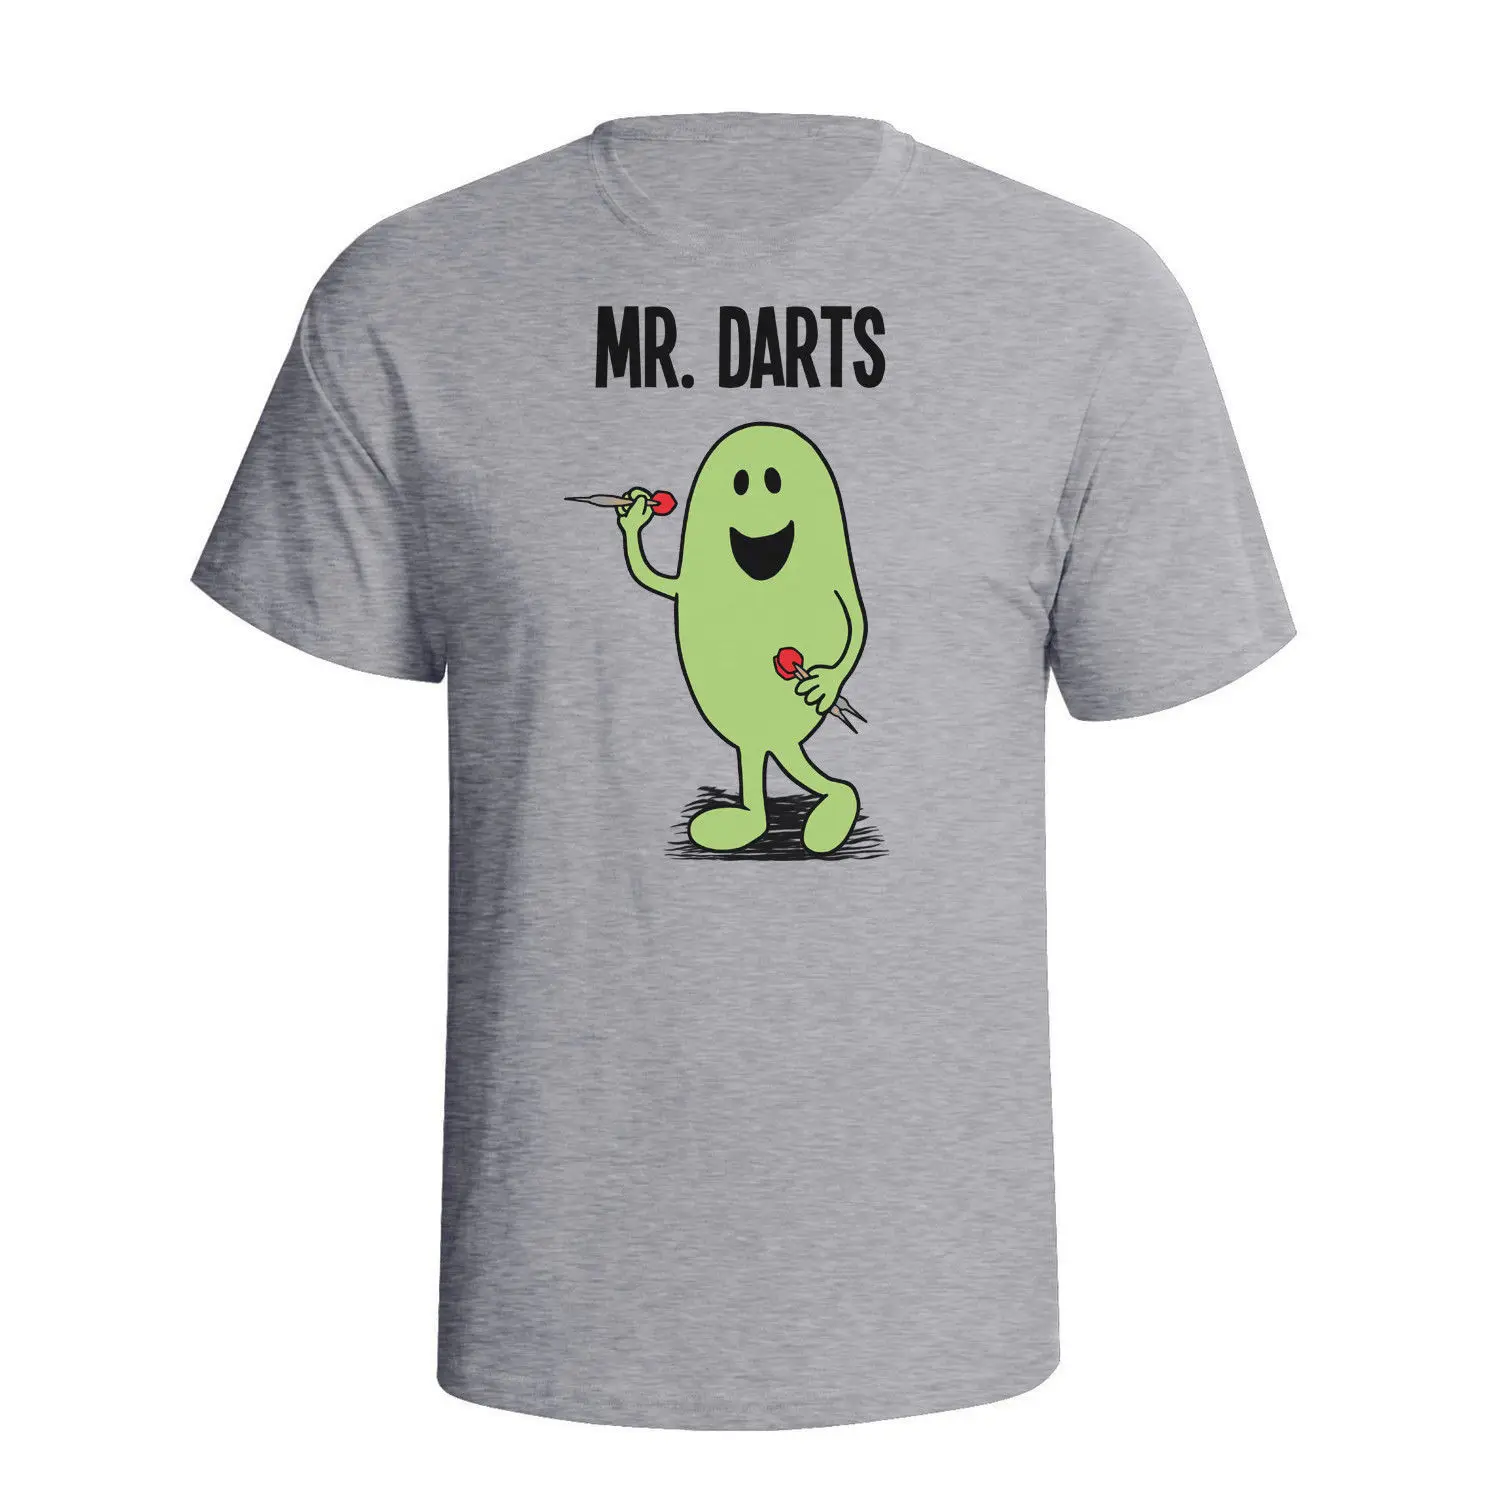 

Mr DARTS Mens T-Shirt Christmas Fathers Day Gift Birthday New T Shirts Funny Tops Tee New Unisex Funny Tops free shipping